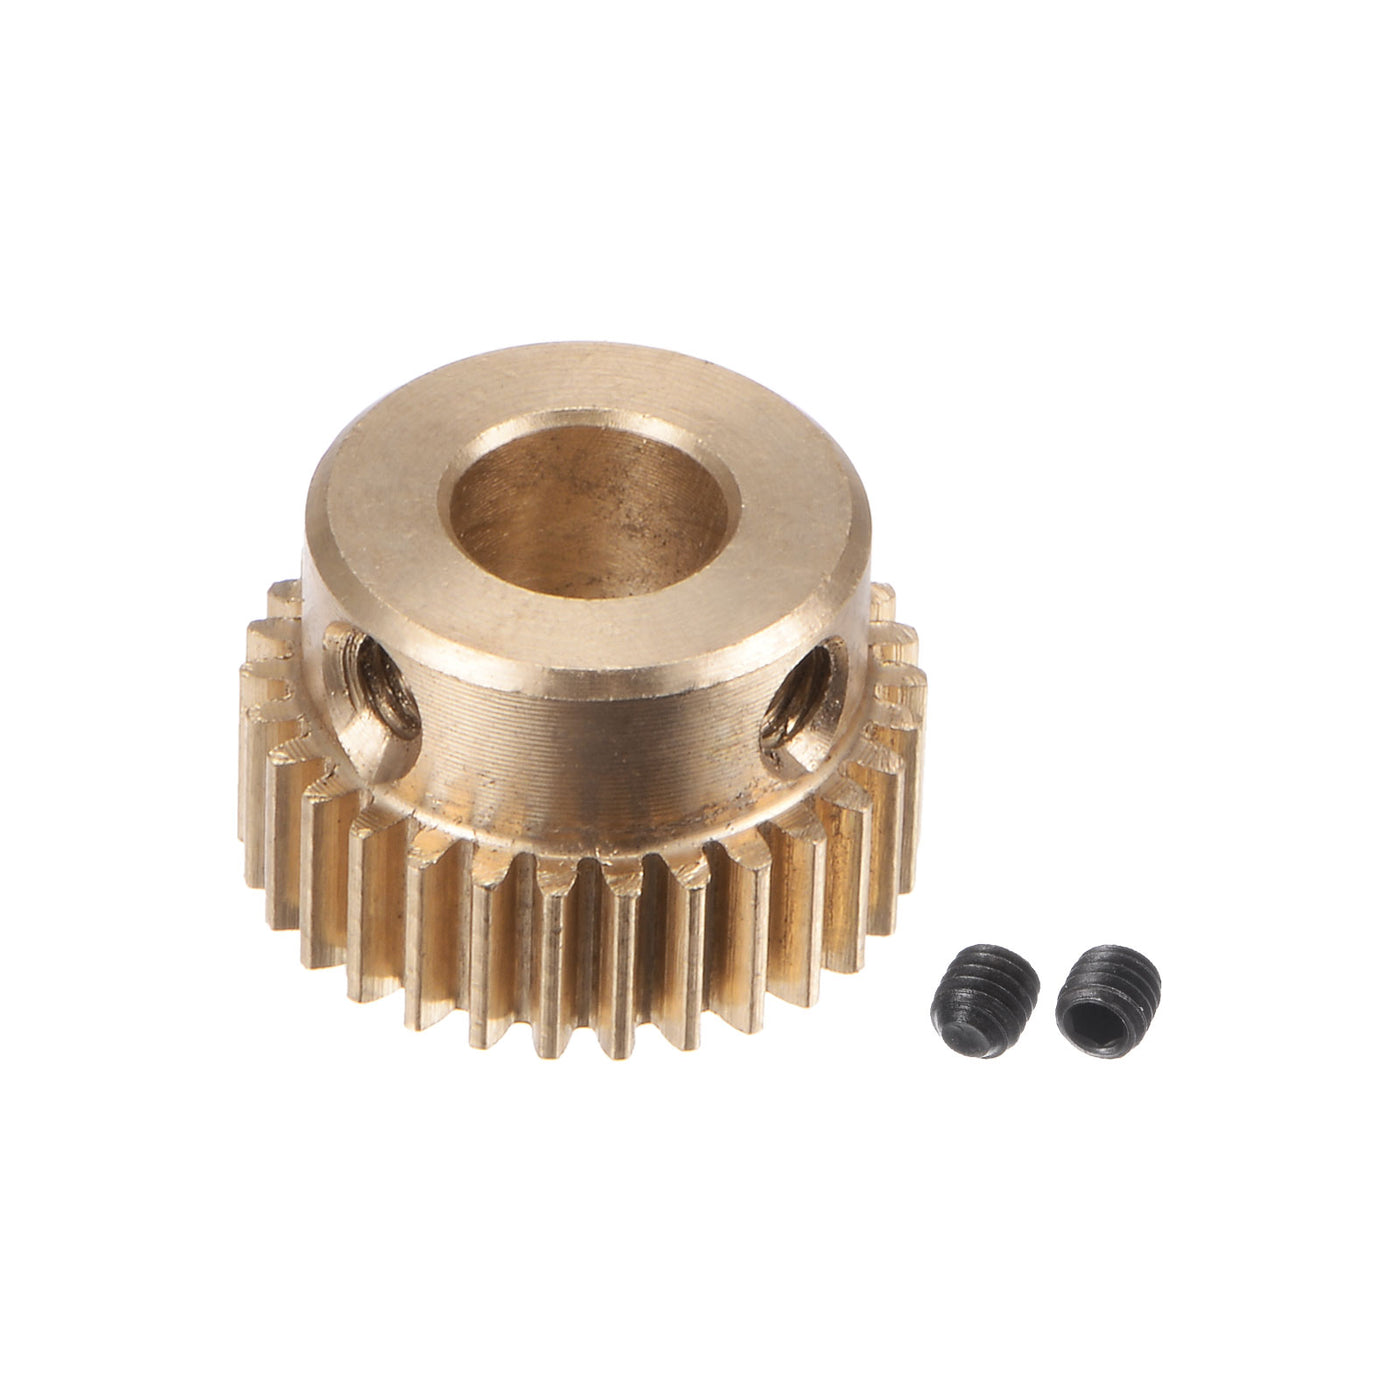 uxcell Uxcell 0.5 Mod 30T 6.35mm Bore 16mm Outer Dia Brass Motor Rack Pinion Gear with Screws